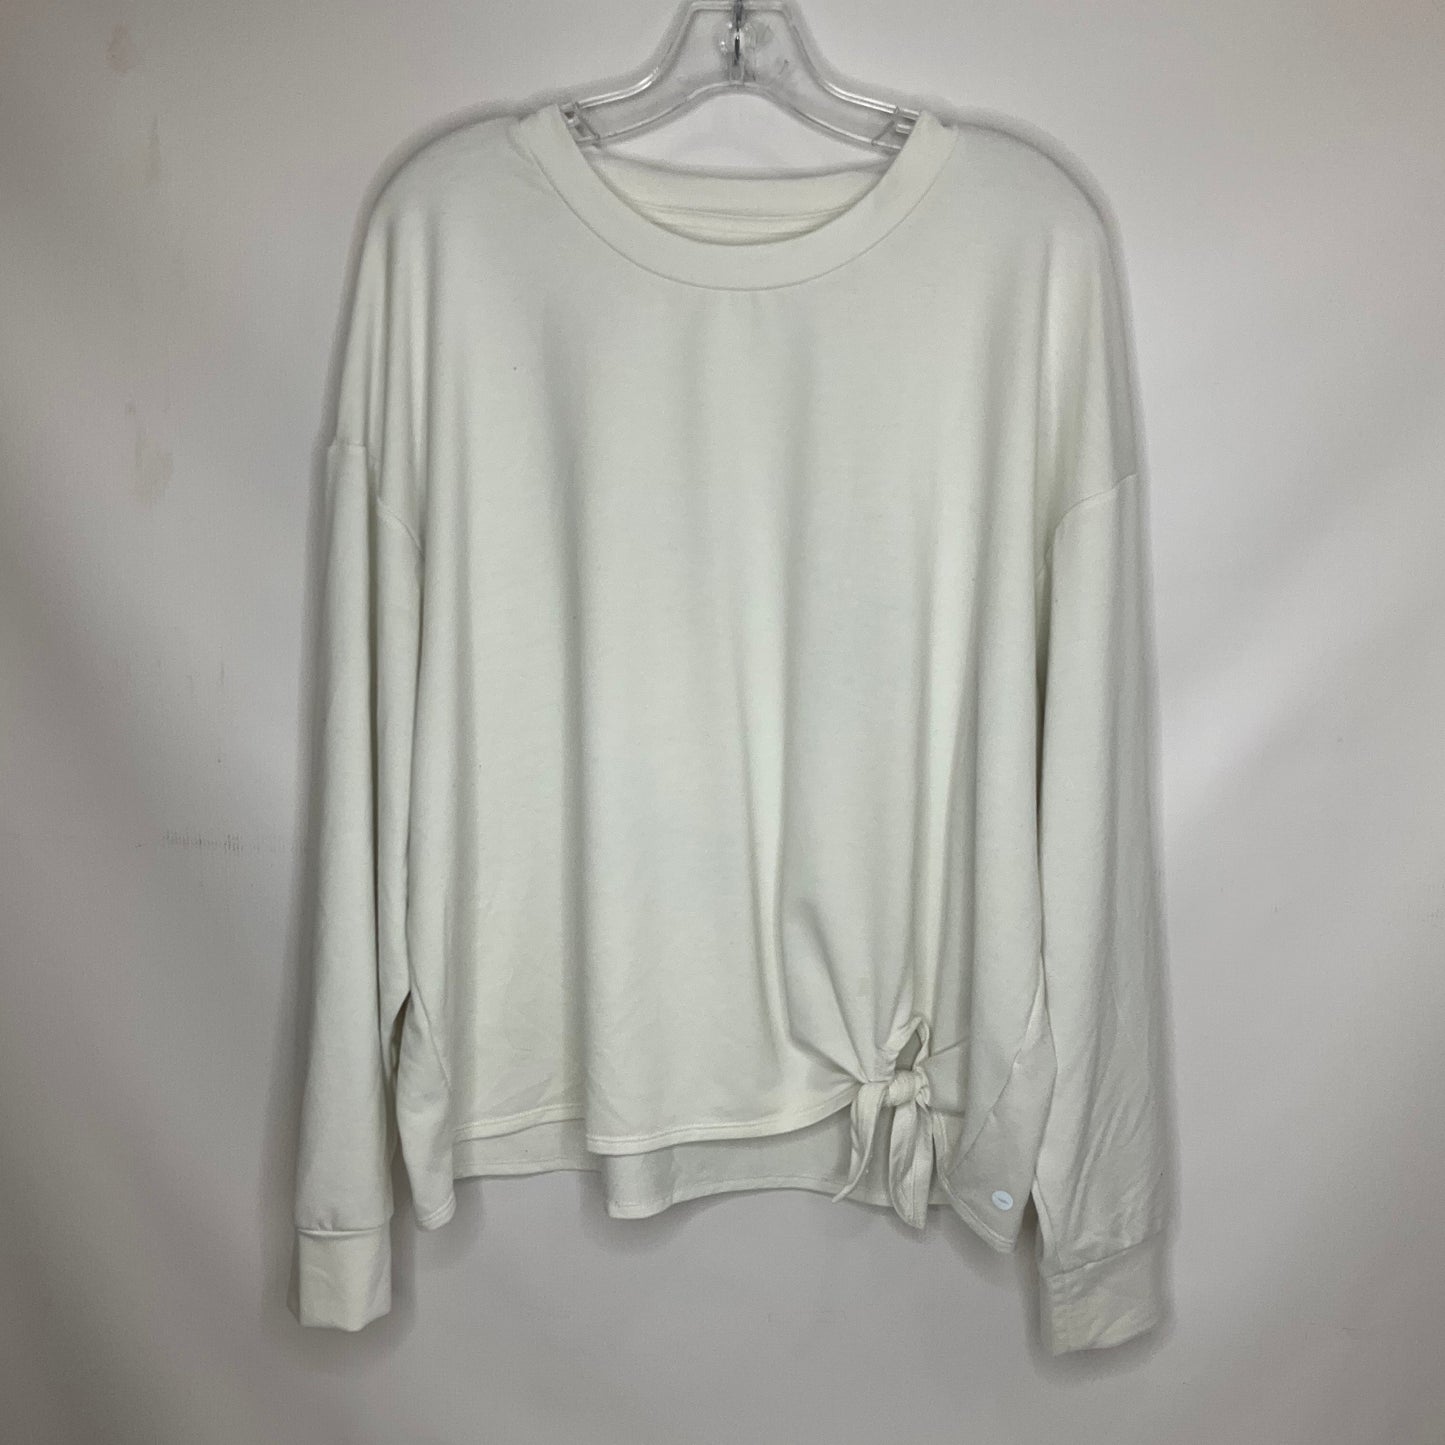 White Athletic Top Long Sleeve Collar Avia, Size Xxl